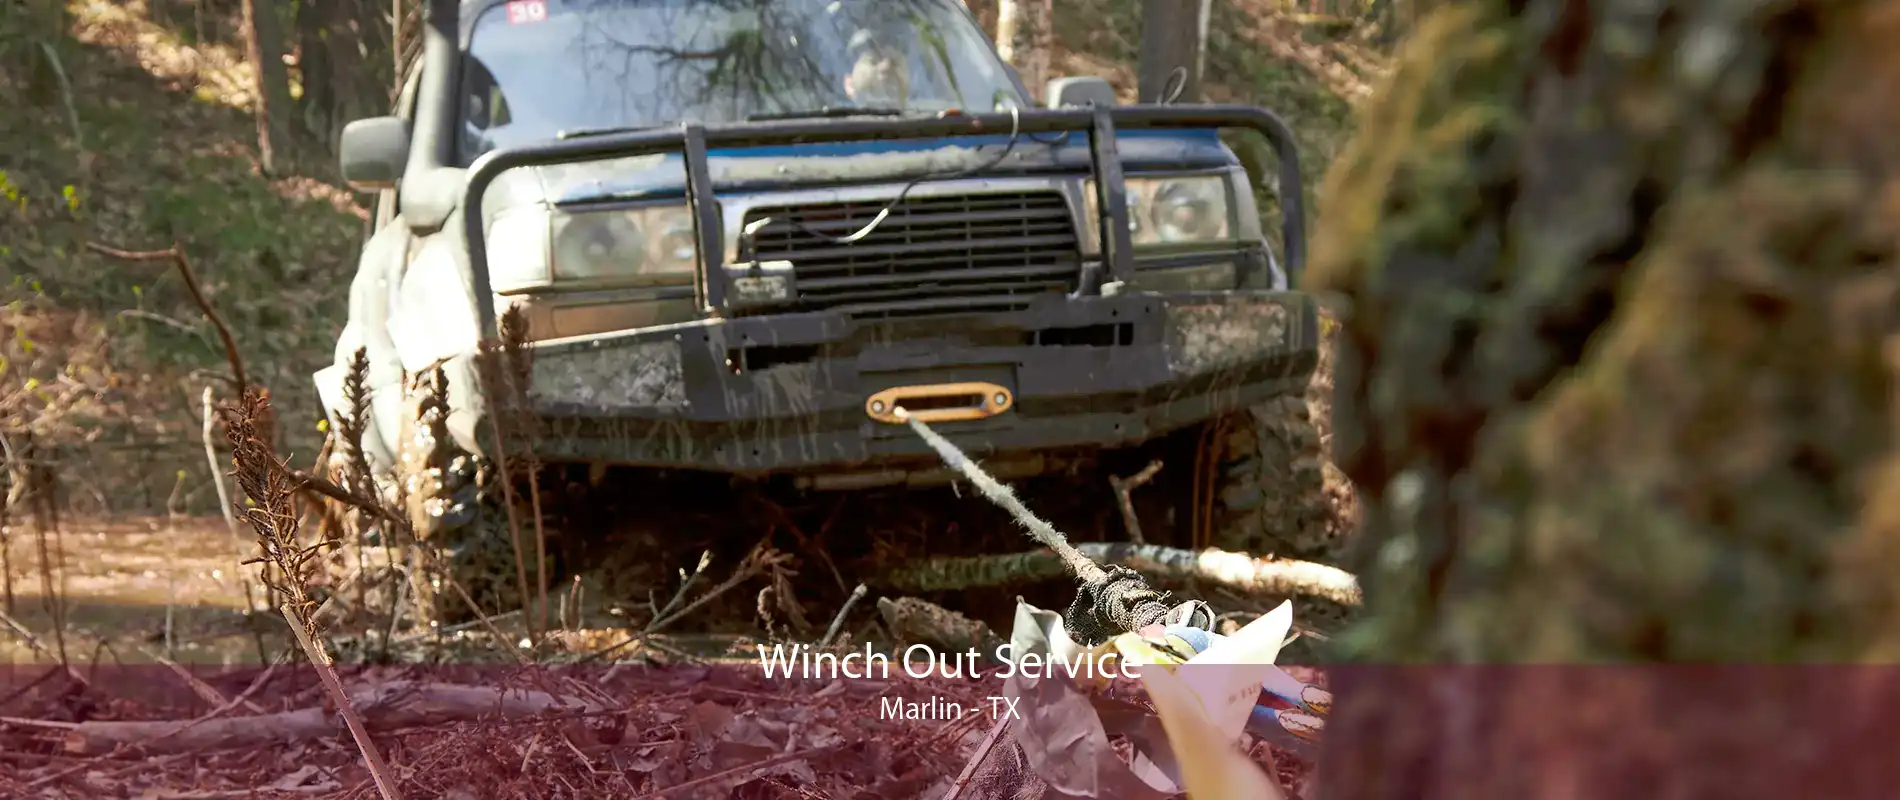 Winch Out Service Marlin - TX